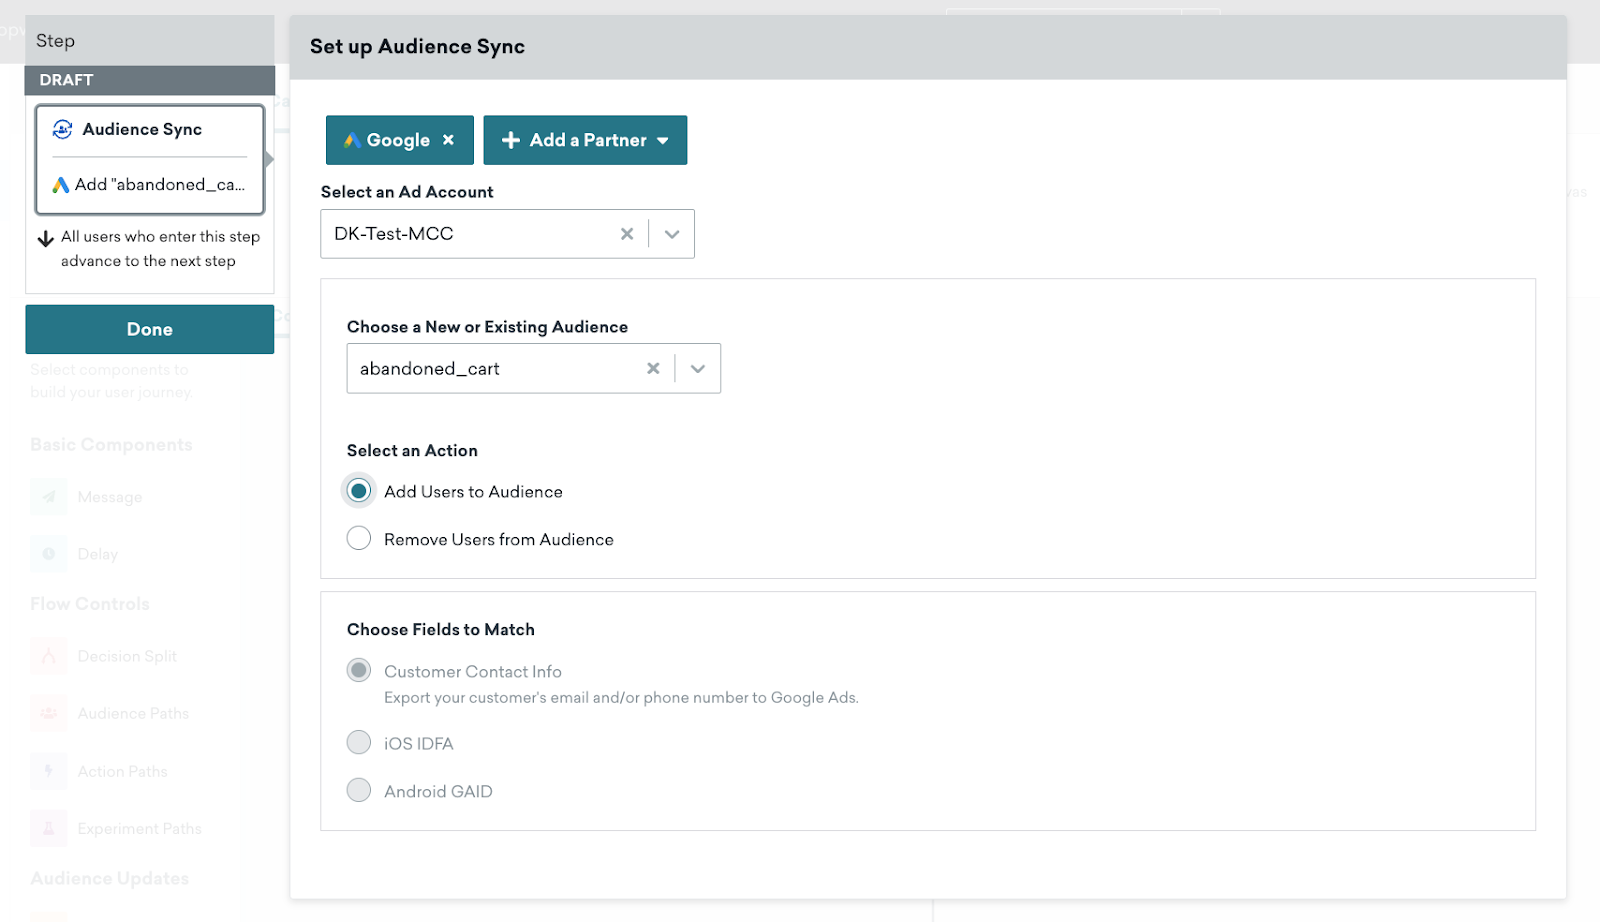 Expanded view of the Custom Audience Canvas component. Here, the desired Ad account and existing audience are selected, as well as the "Add user to Audience" radio button.